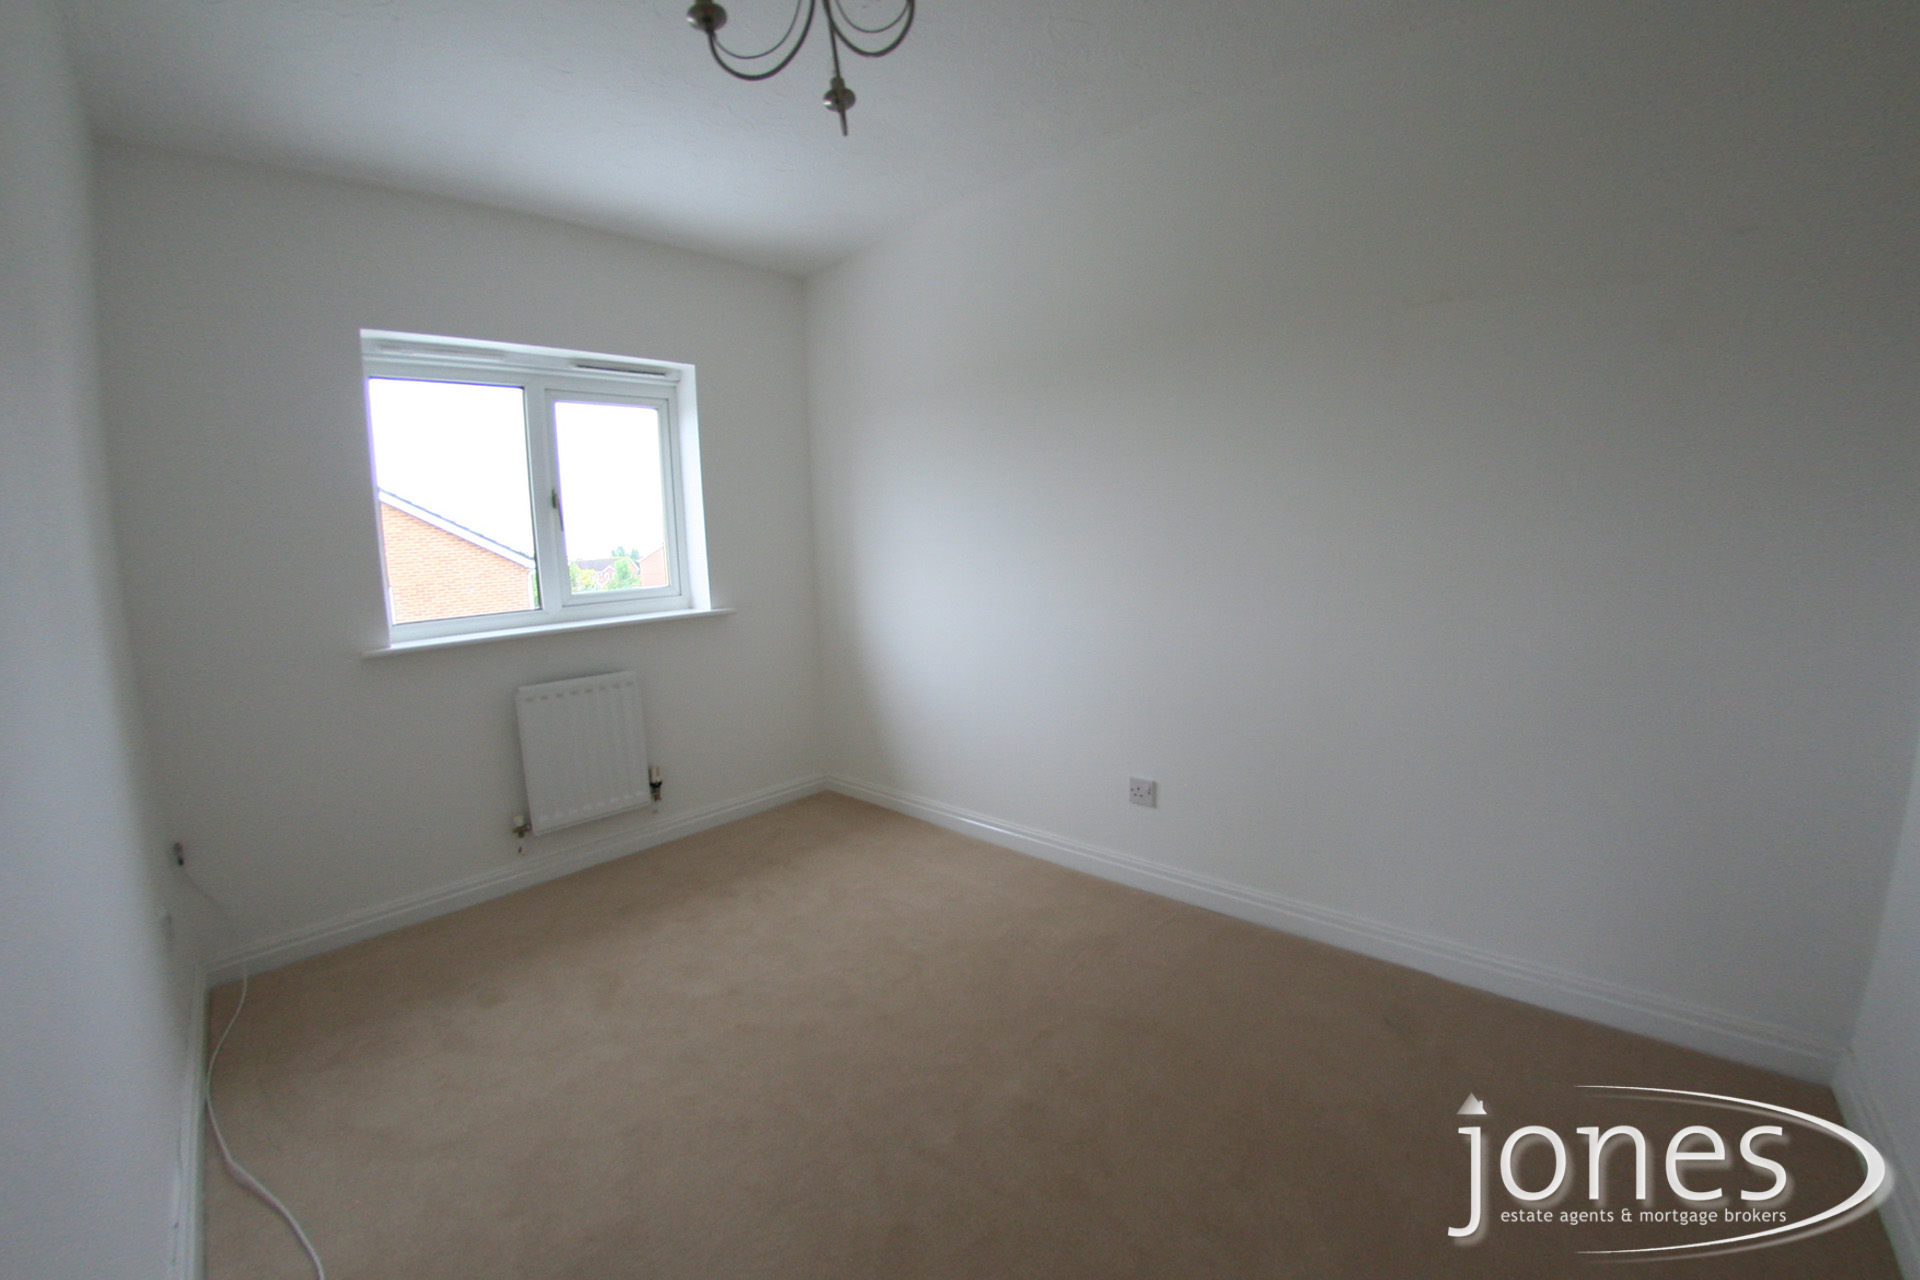 Home for Sale Let - Photo 08 Honeycomb Avenue, Stockton on Tees, TS19 0FF